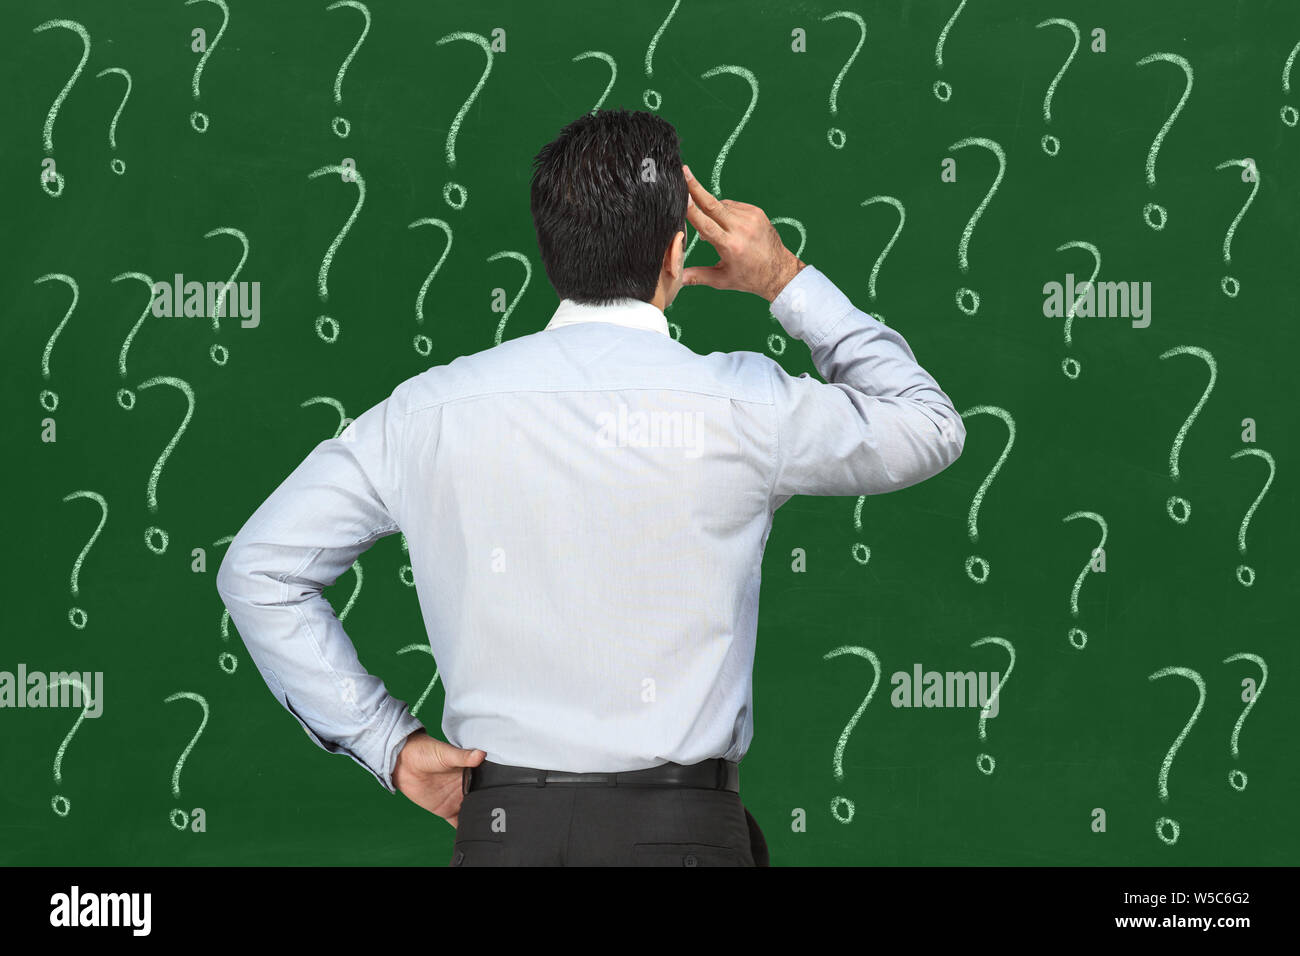 Businessman looking at question marks Stock Photo